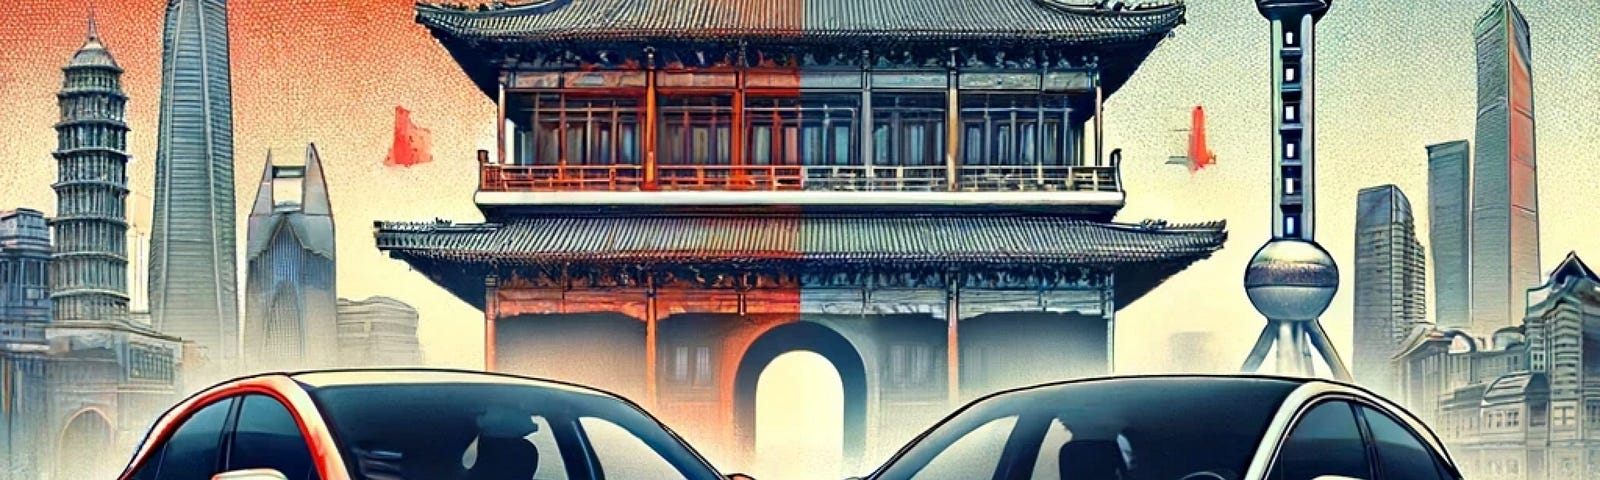 IMAGE: An illustration confronting a Chinese electric vehicle with a European one, highlighting their design and technological features. The background subtly hints at their respective regions with elements from both Chinese and European cityscapes